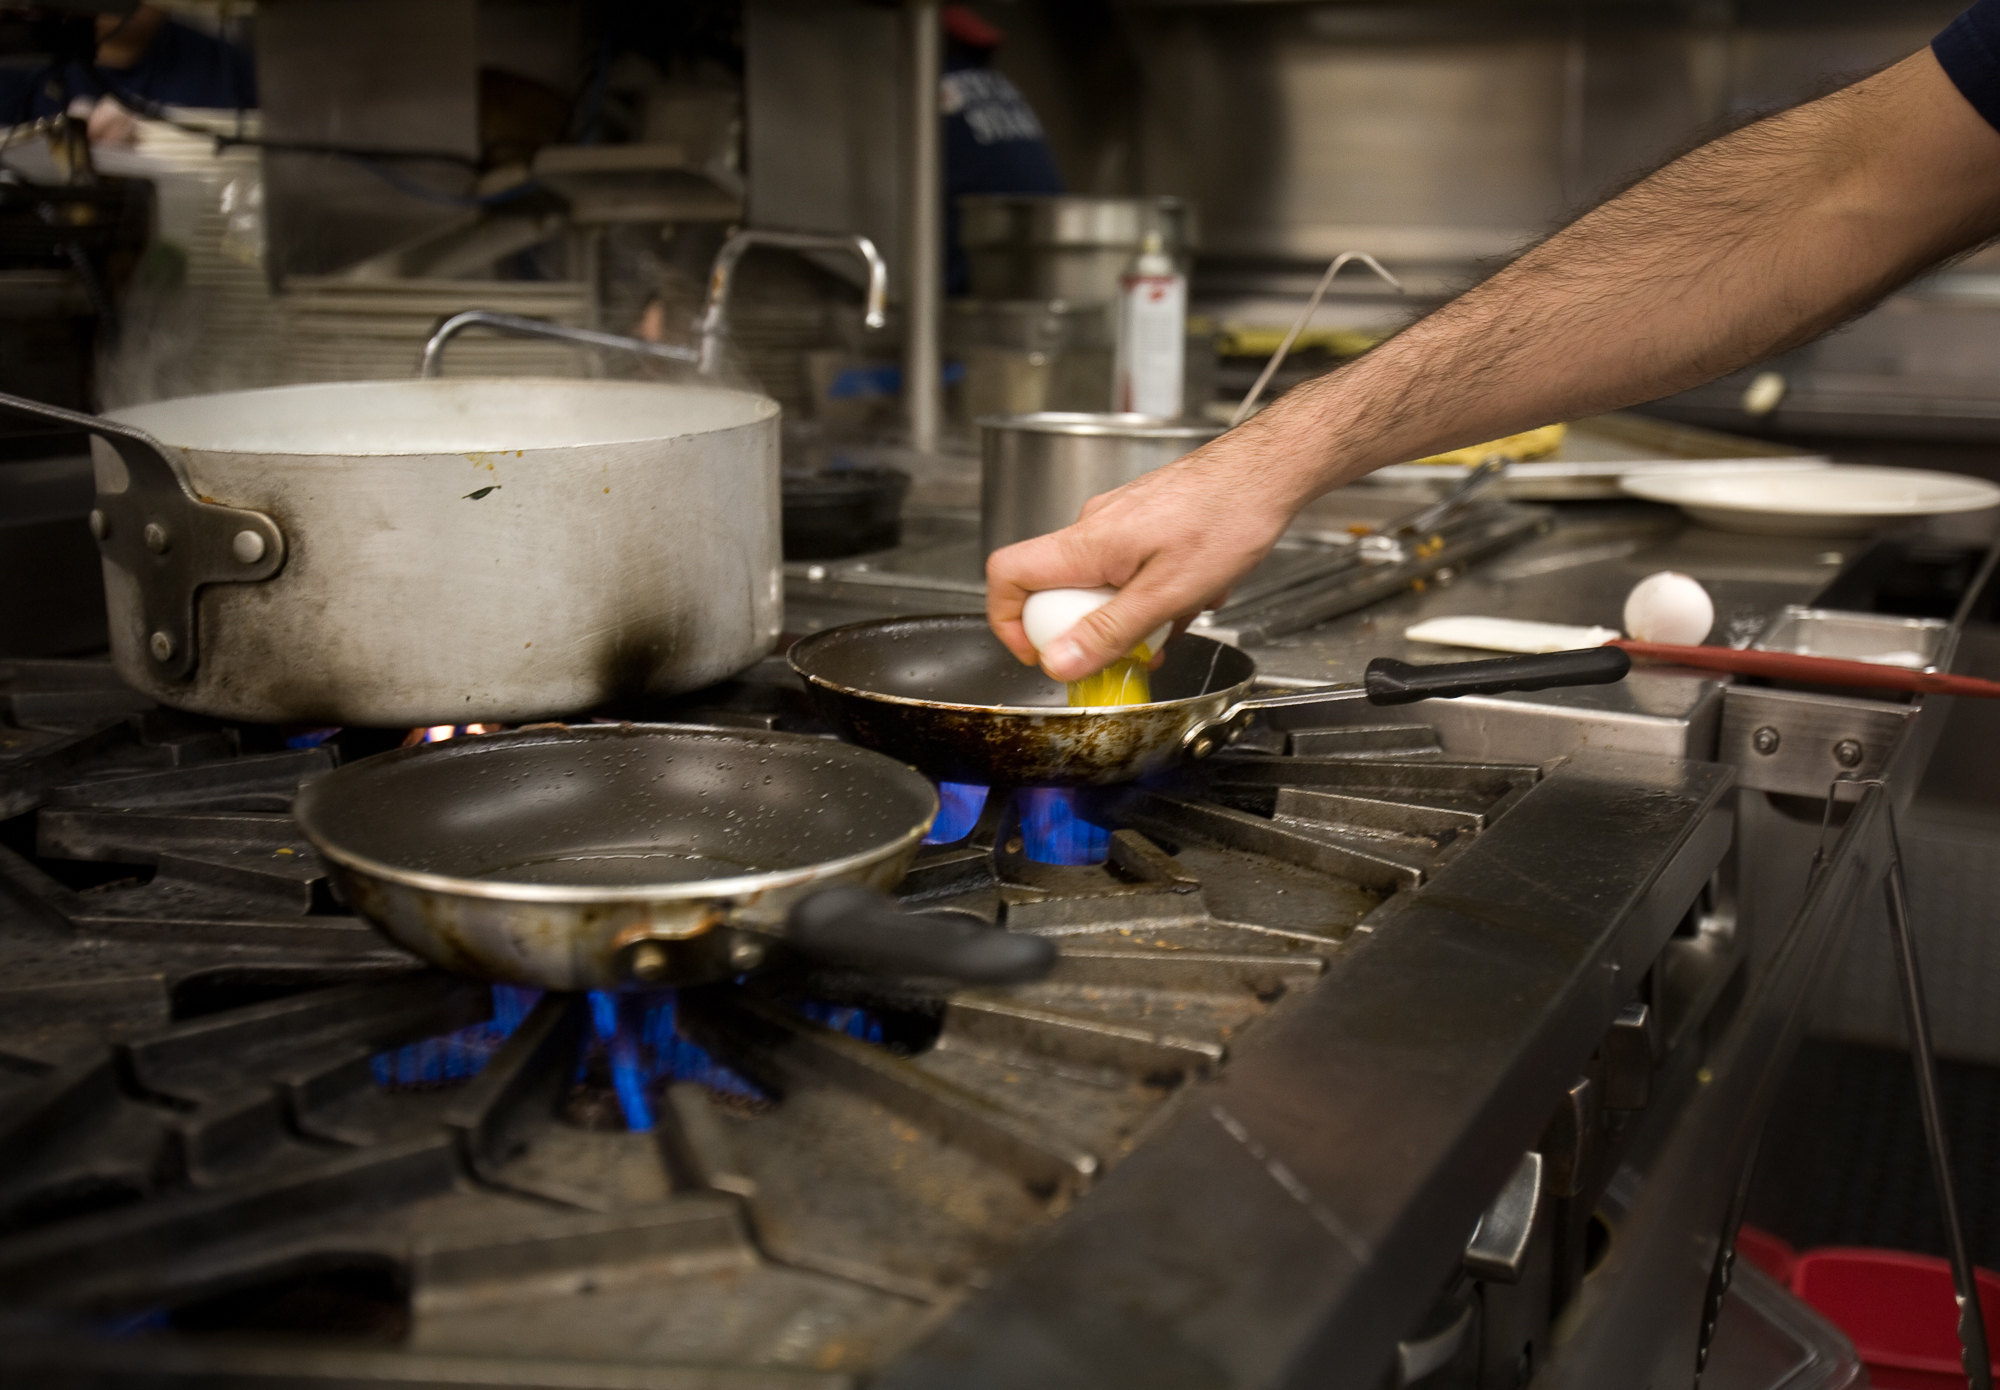 A chef cracks an egg over a pan on a gas stove.